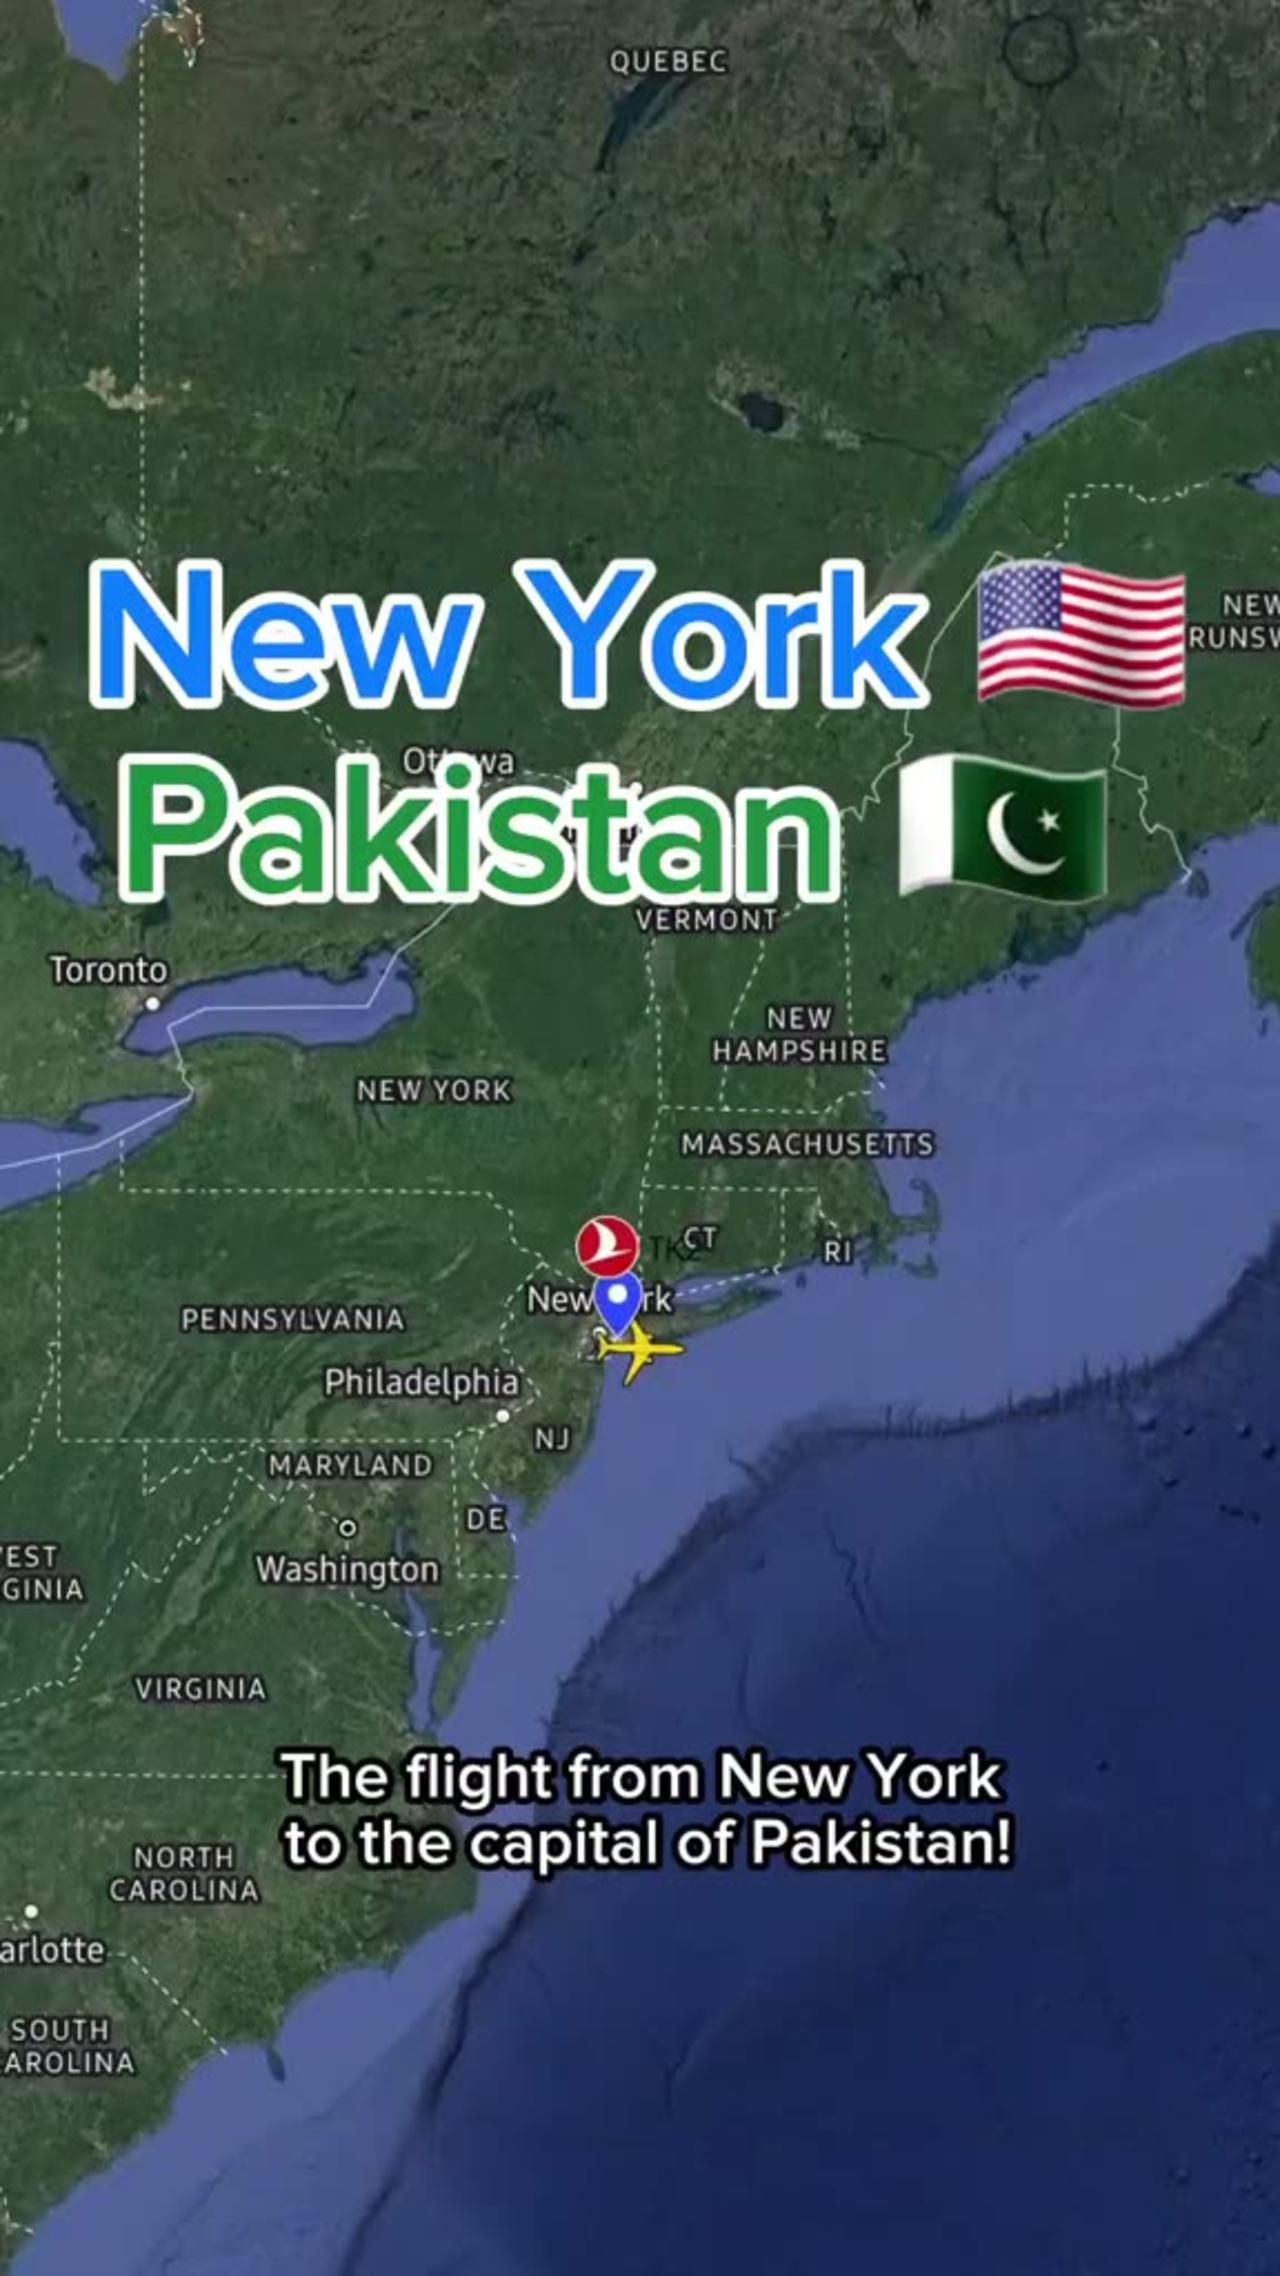 New York - Pakistan, please follow like subscribe and share